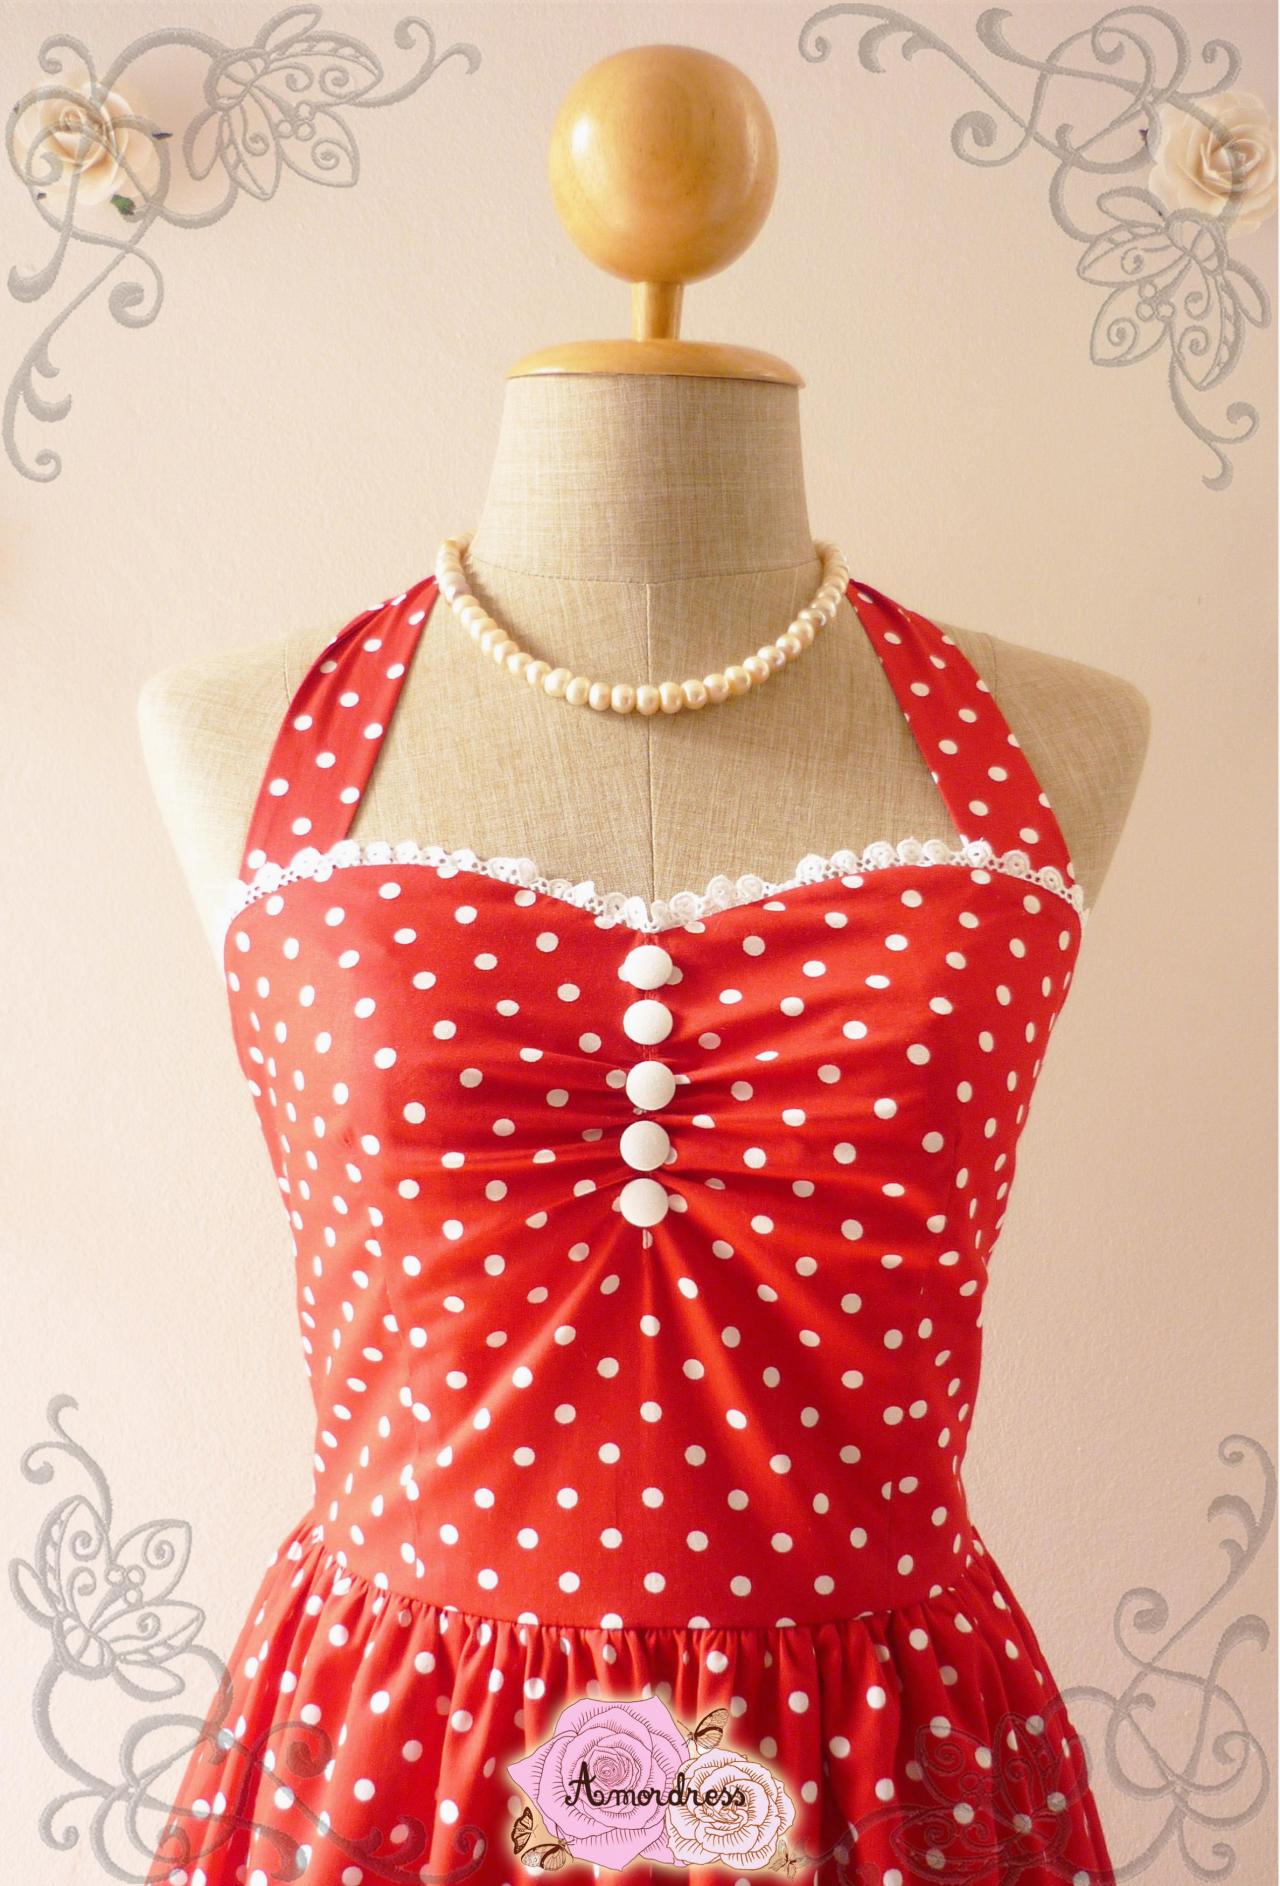 Red Polka Dot Party Dress Vintage Inspired Party Tea Dress Bridesmaid Holiday Polka Dot Unique Handmade Dress -size Xs, S, M, L, Xl